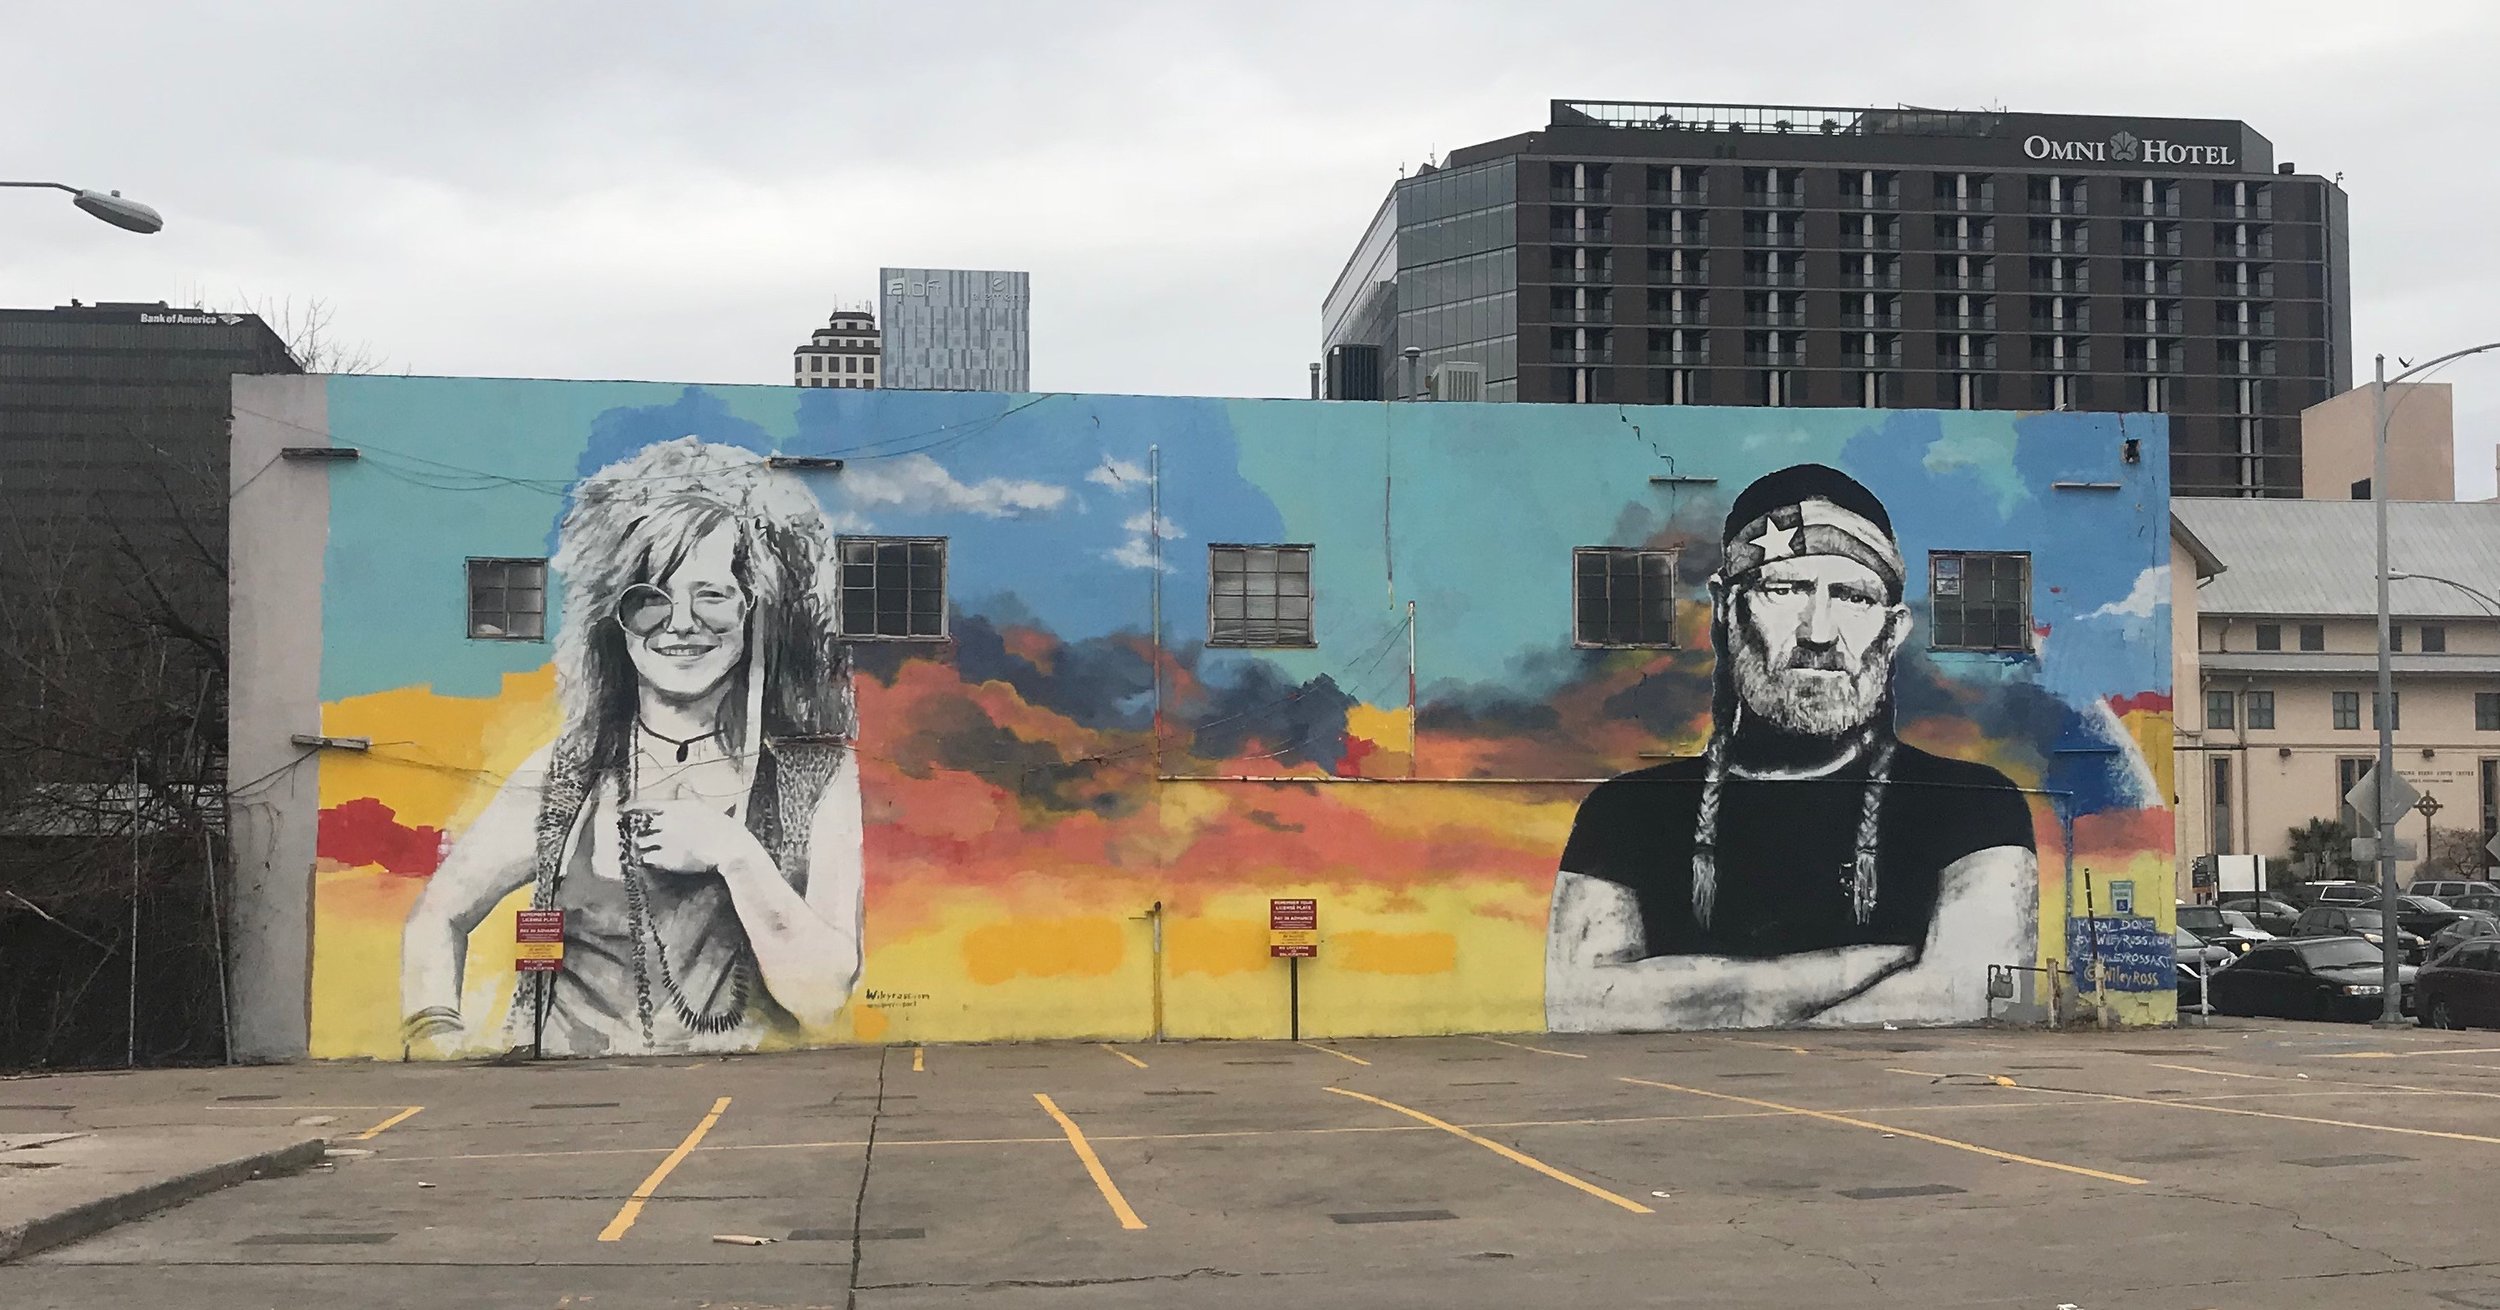  Janis Joplin and Willie Nelson, two Austin icons, keep watch over a downtown parking lot. 